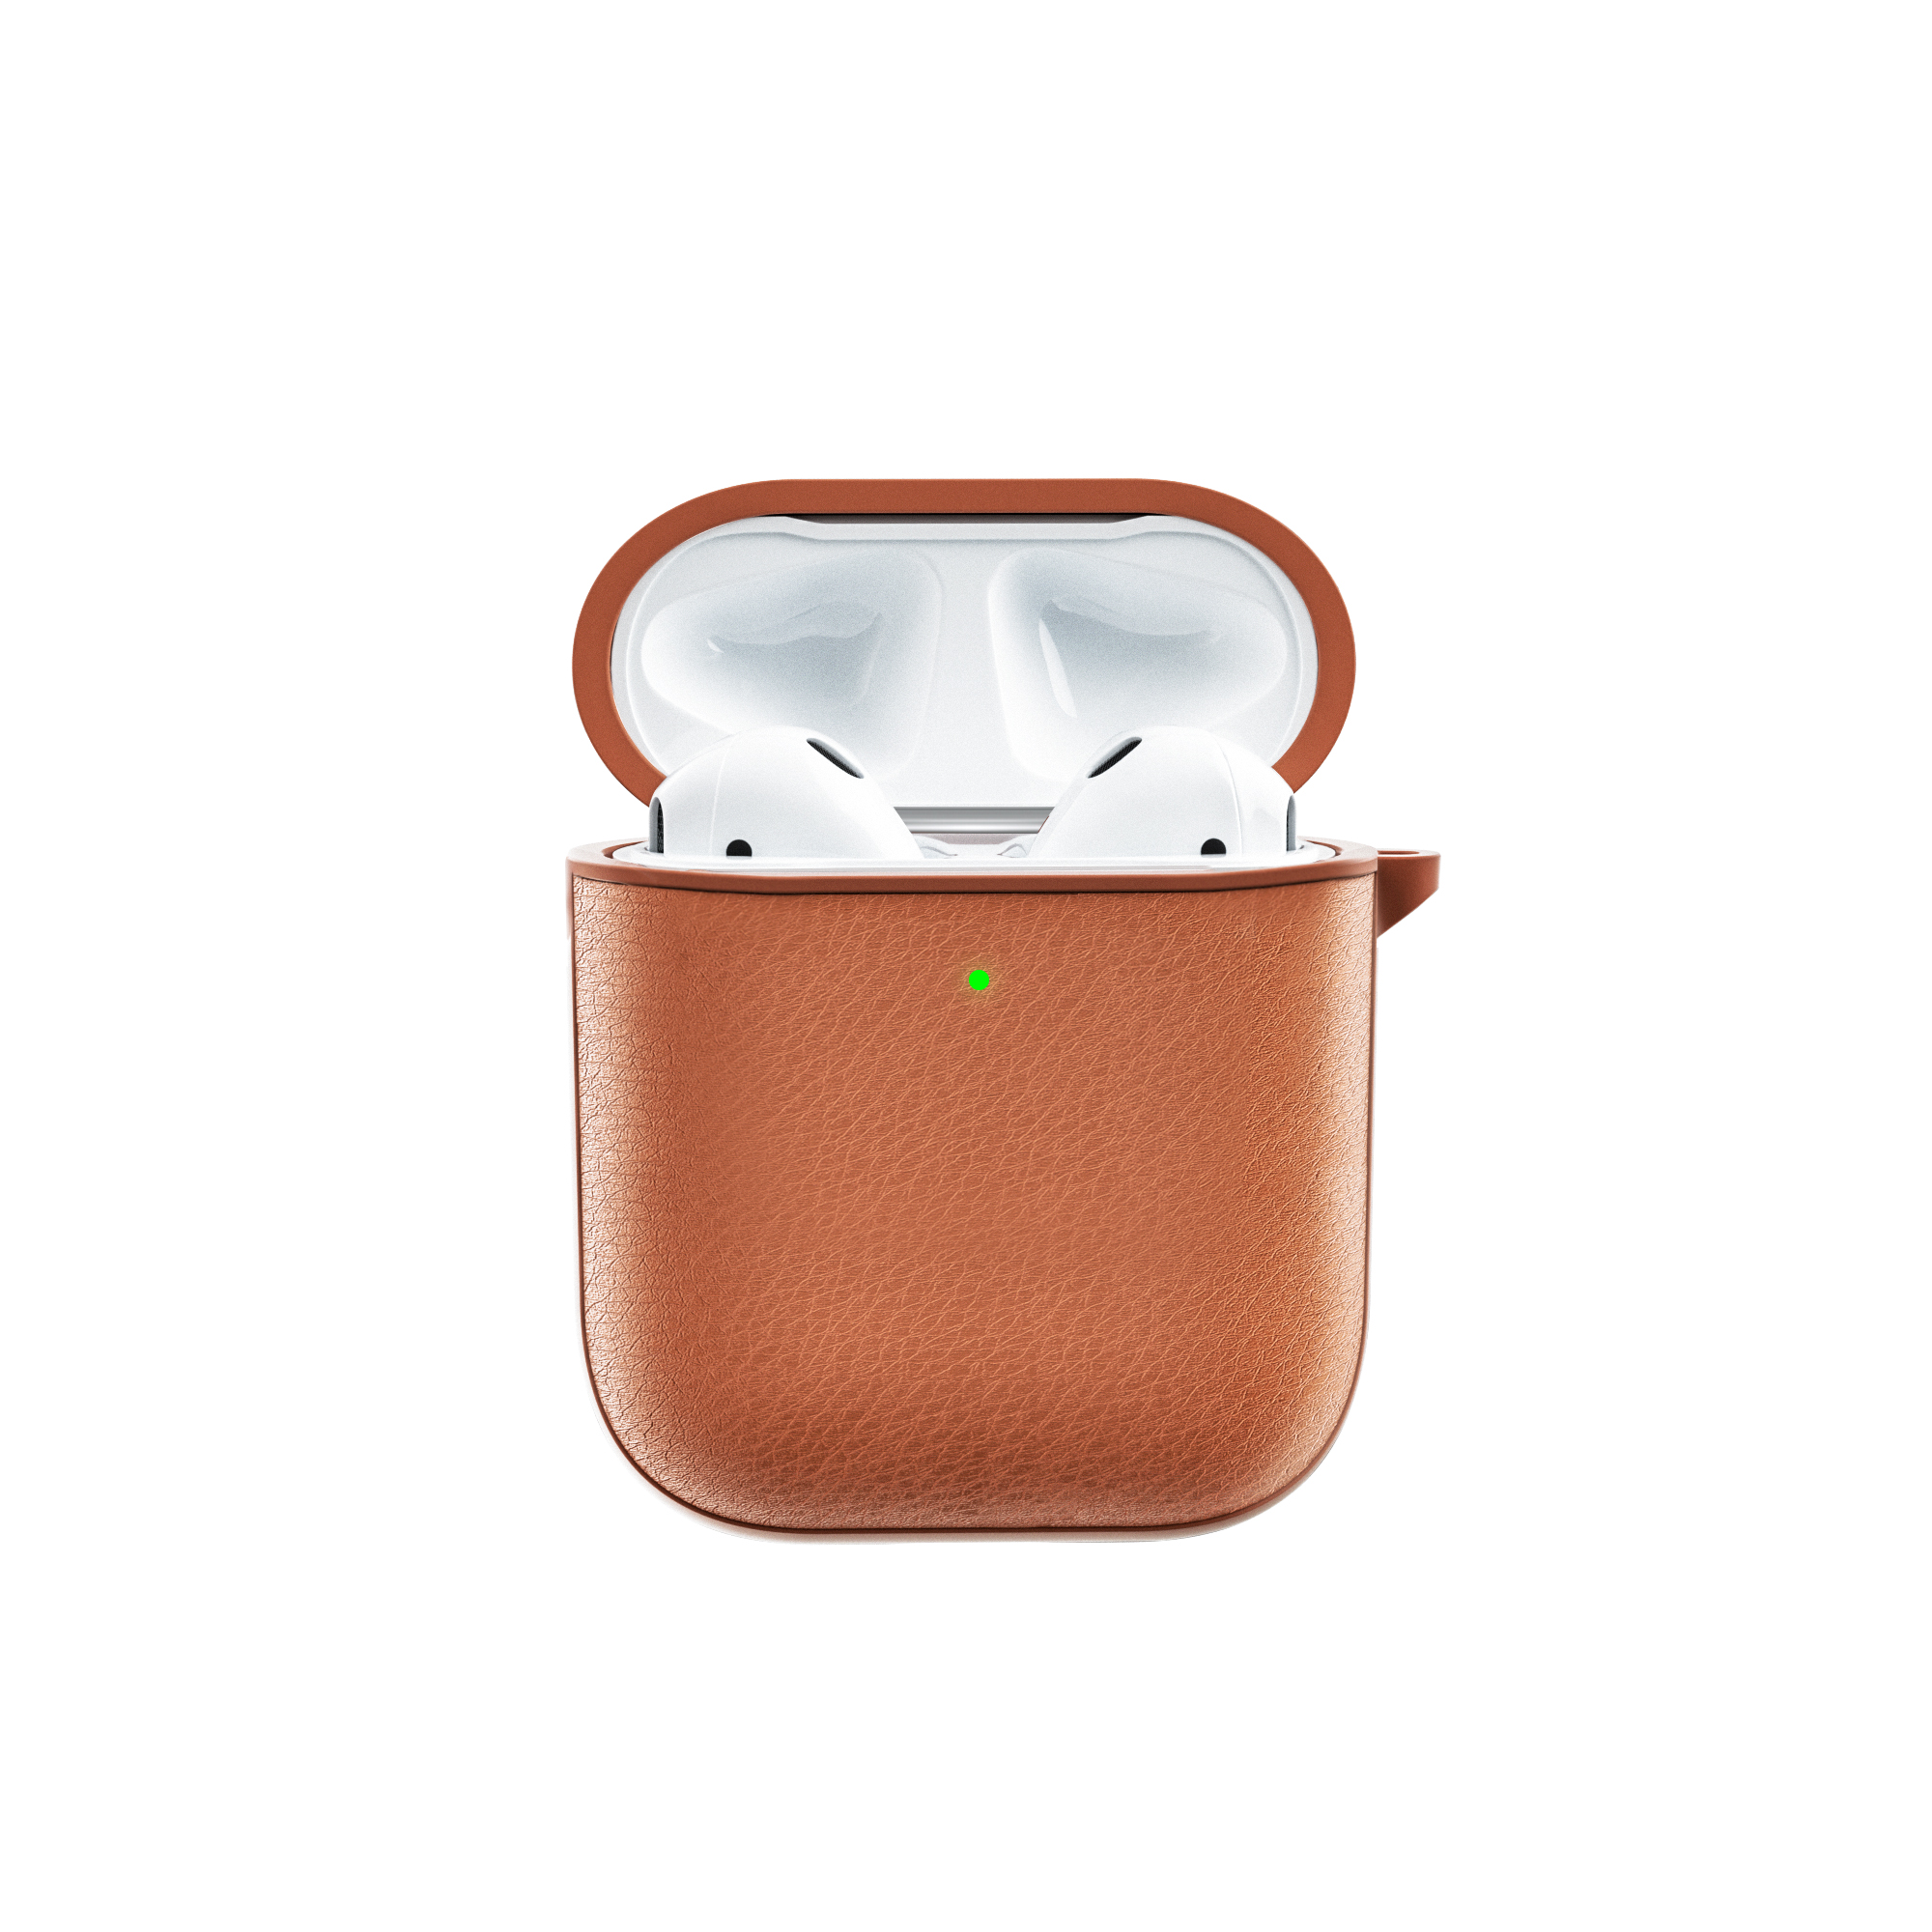 WiWU Calfskin Genuine Leather Case Portable Carry TPU+Calfskin 360 Degree Full Protection for Airpods